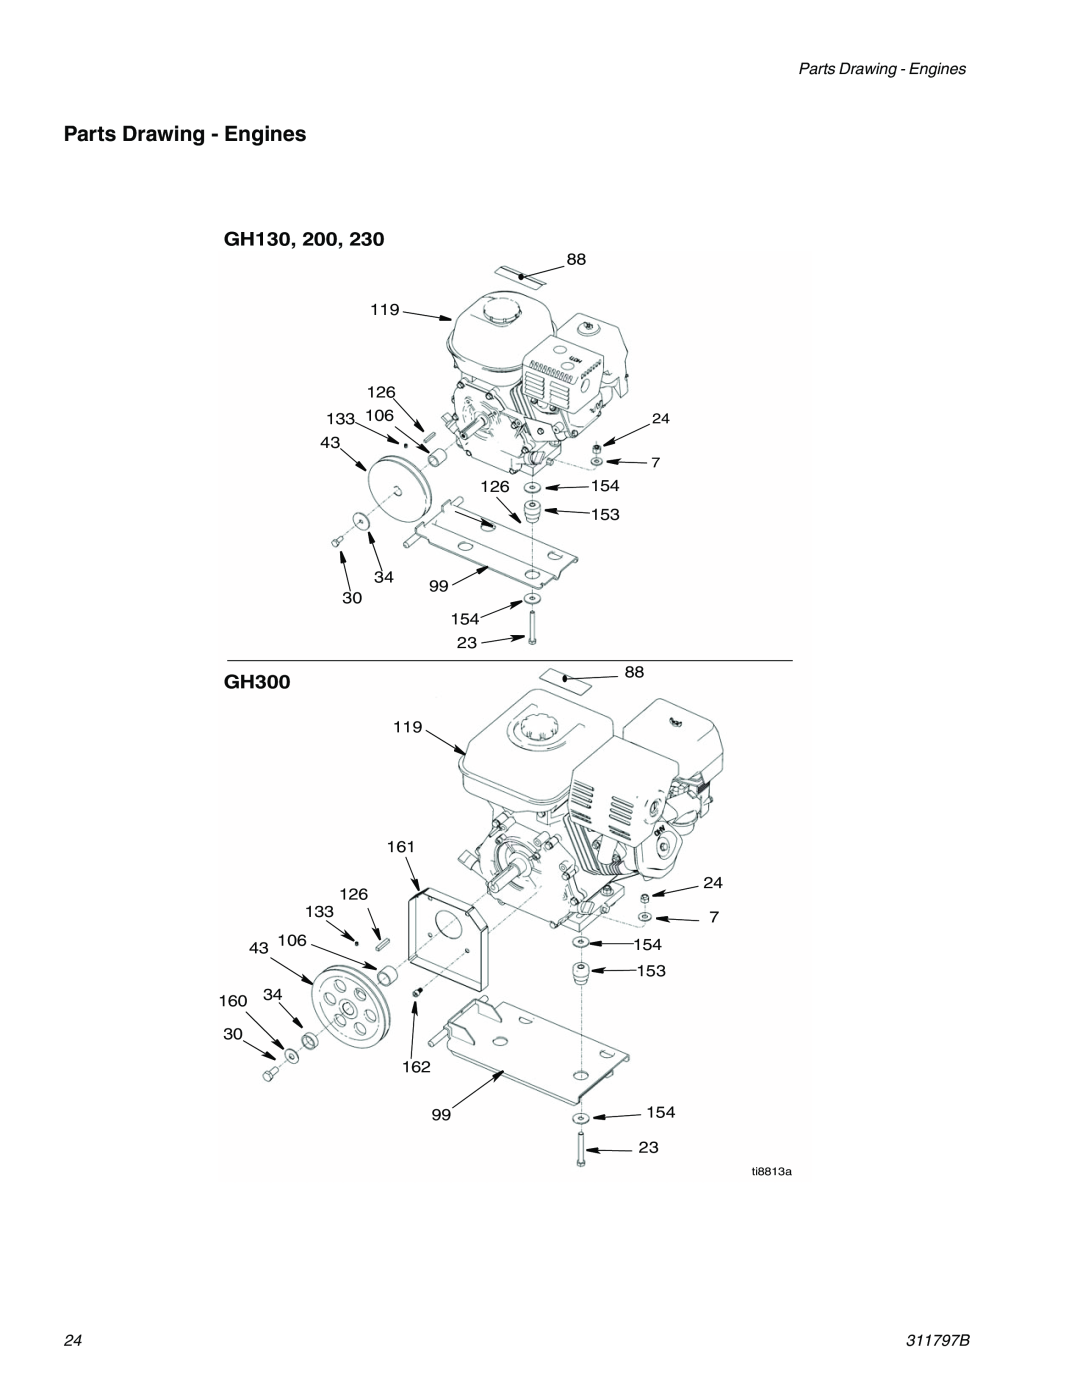 Uniden GH 230, GH 200, GH 130, GH 300 important safety instructions Parts Drawing - Engines, GH130, GH300 